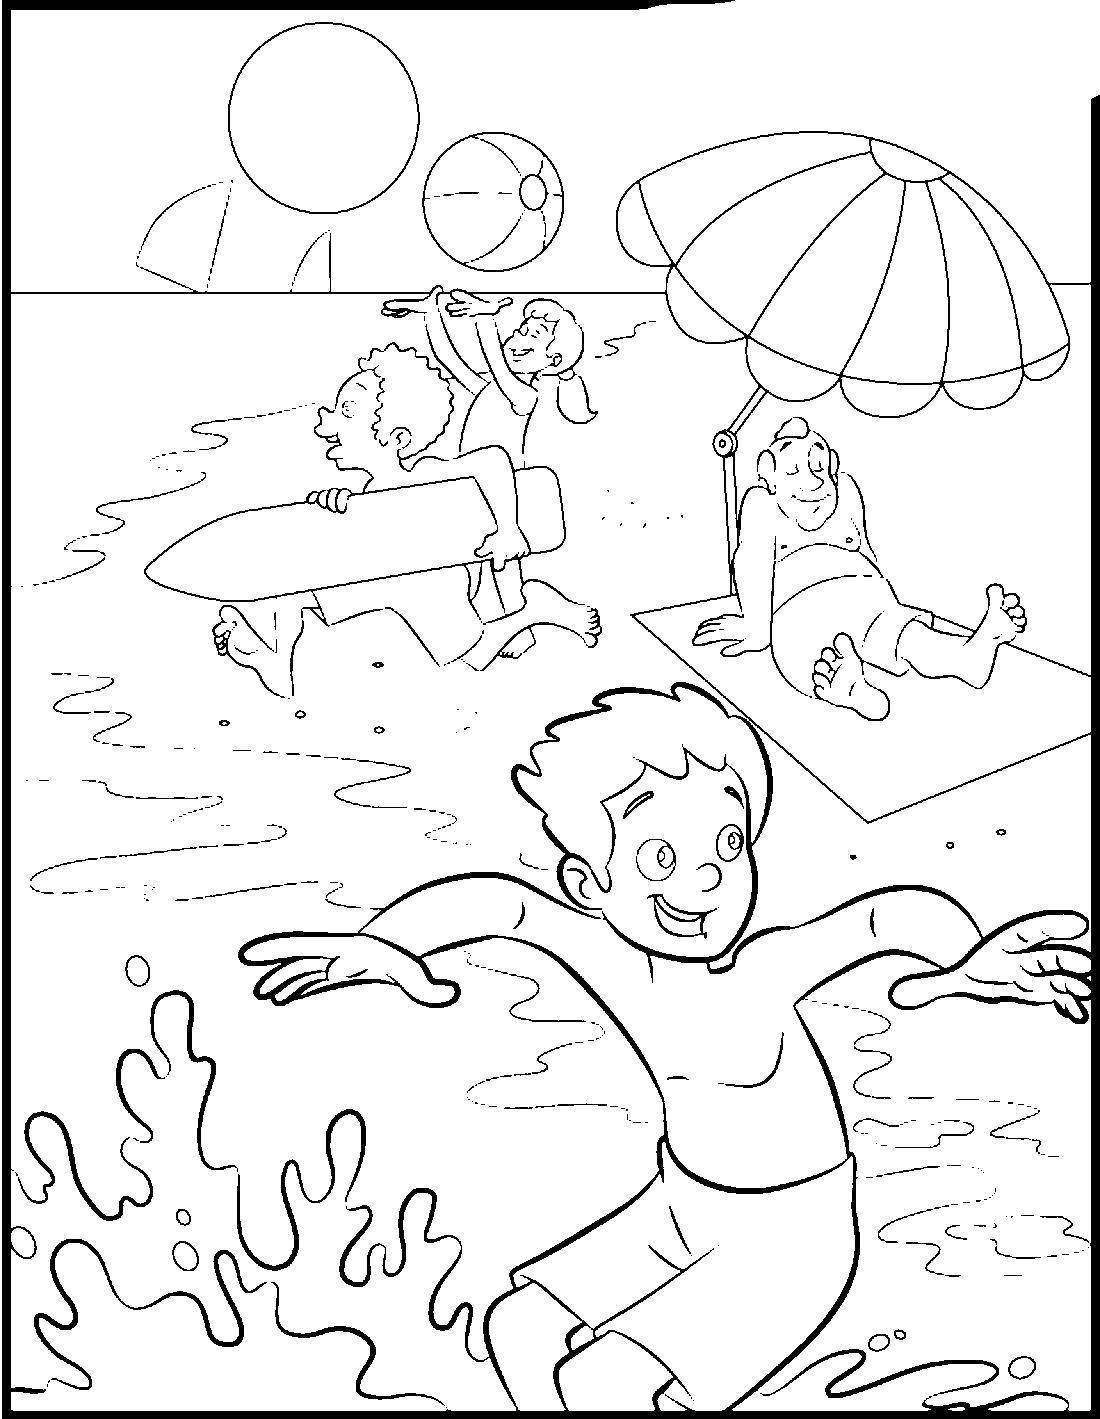 Coloring People on the beach. Category Beach. Tags:  beach, sea, sand, umbrella, people, sun, swimming.